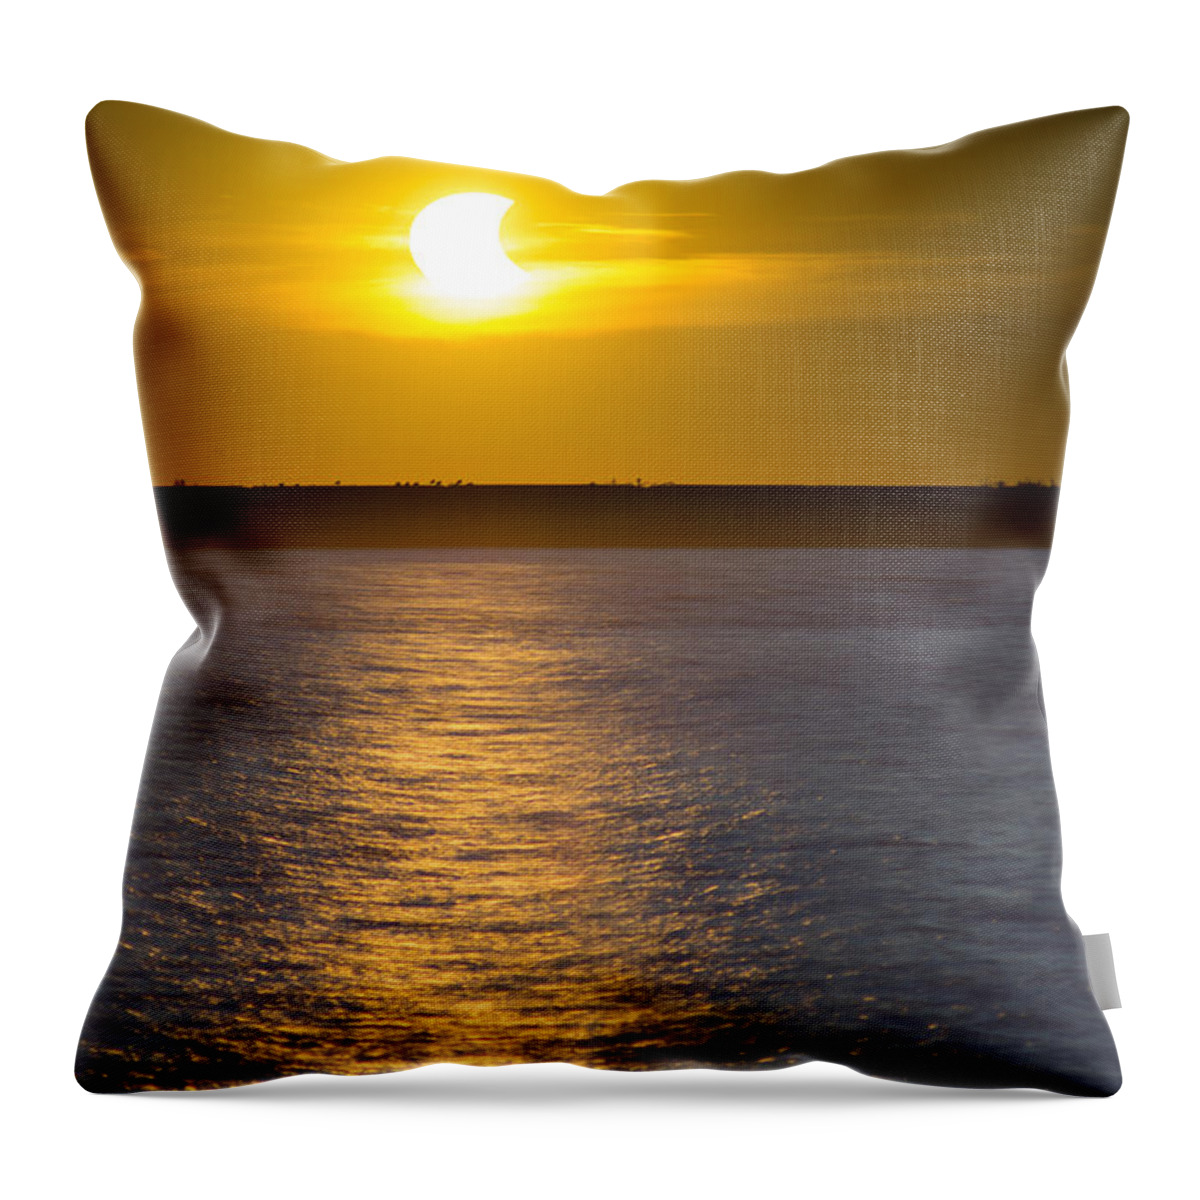 Solar Eclipse Throw Pillow featuring the photograph Sunset Eclipse by Chris Bordeleau